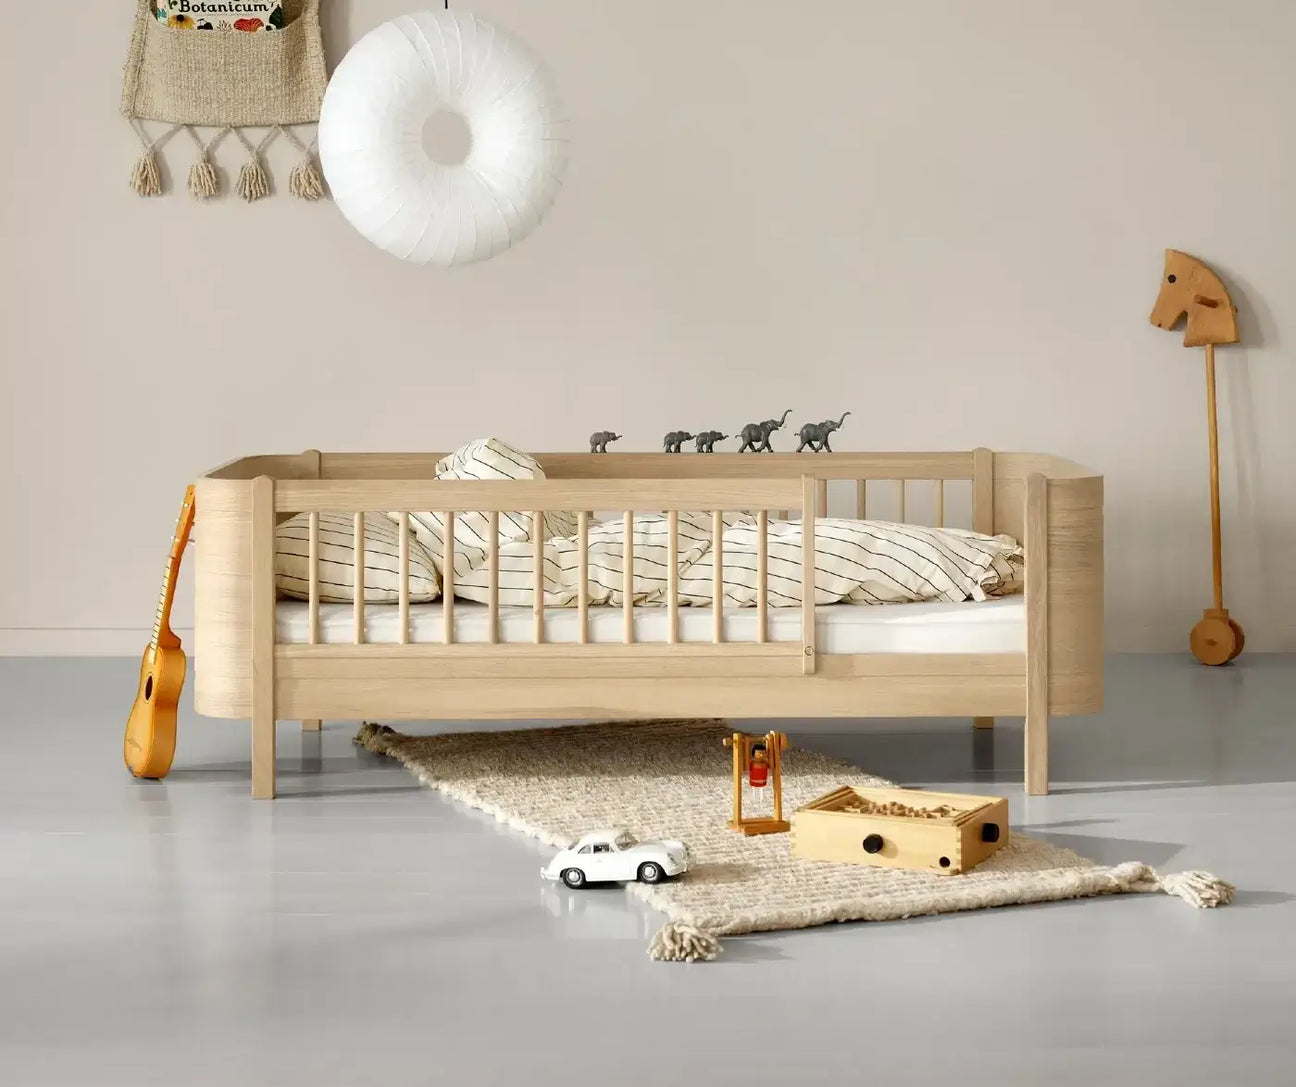 Oliver Furniture Oak Toddler Bed in a Bedroom with rug and toys on floor